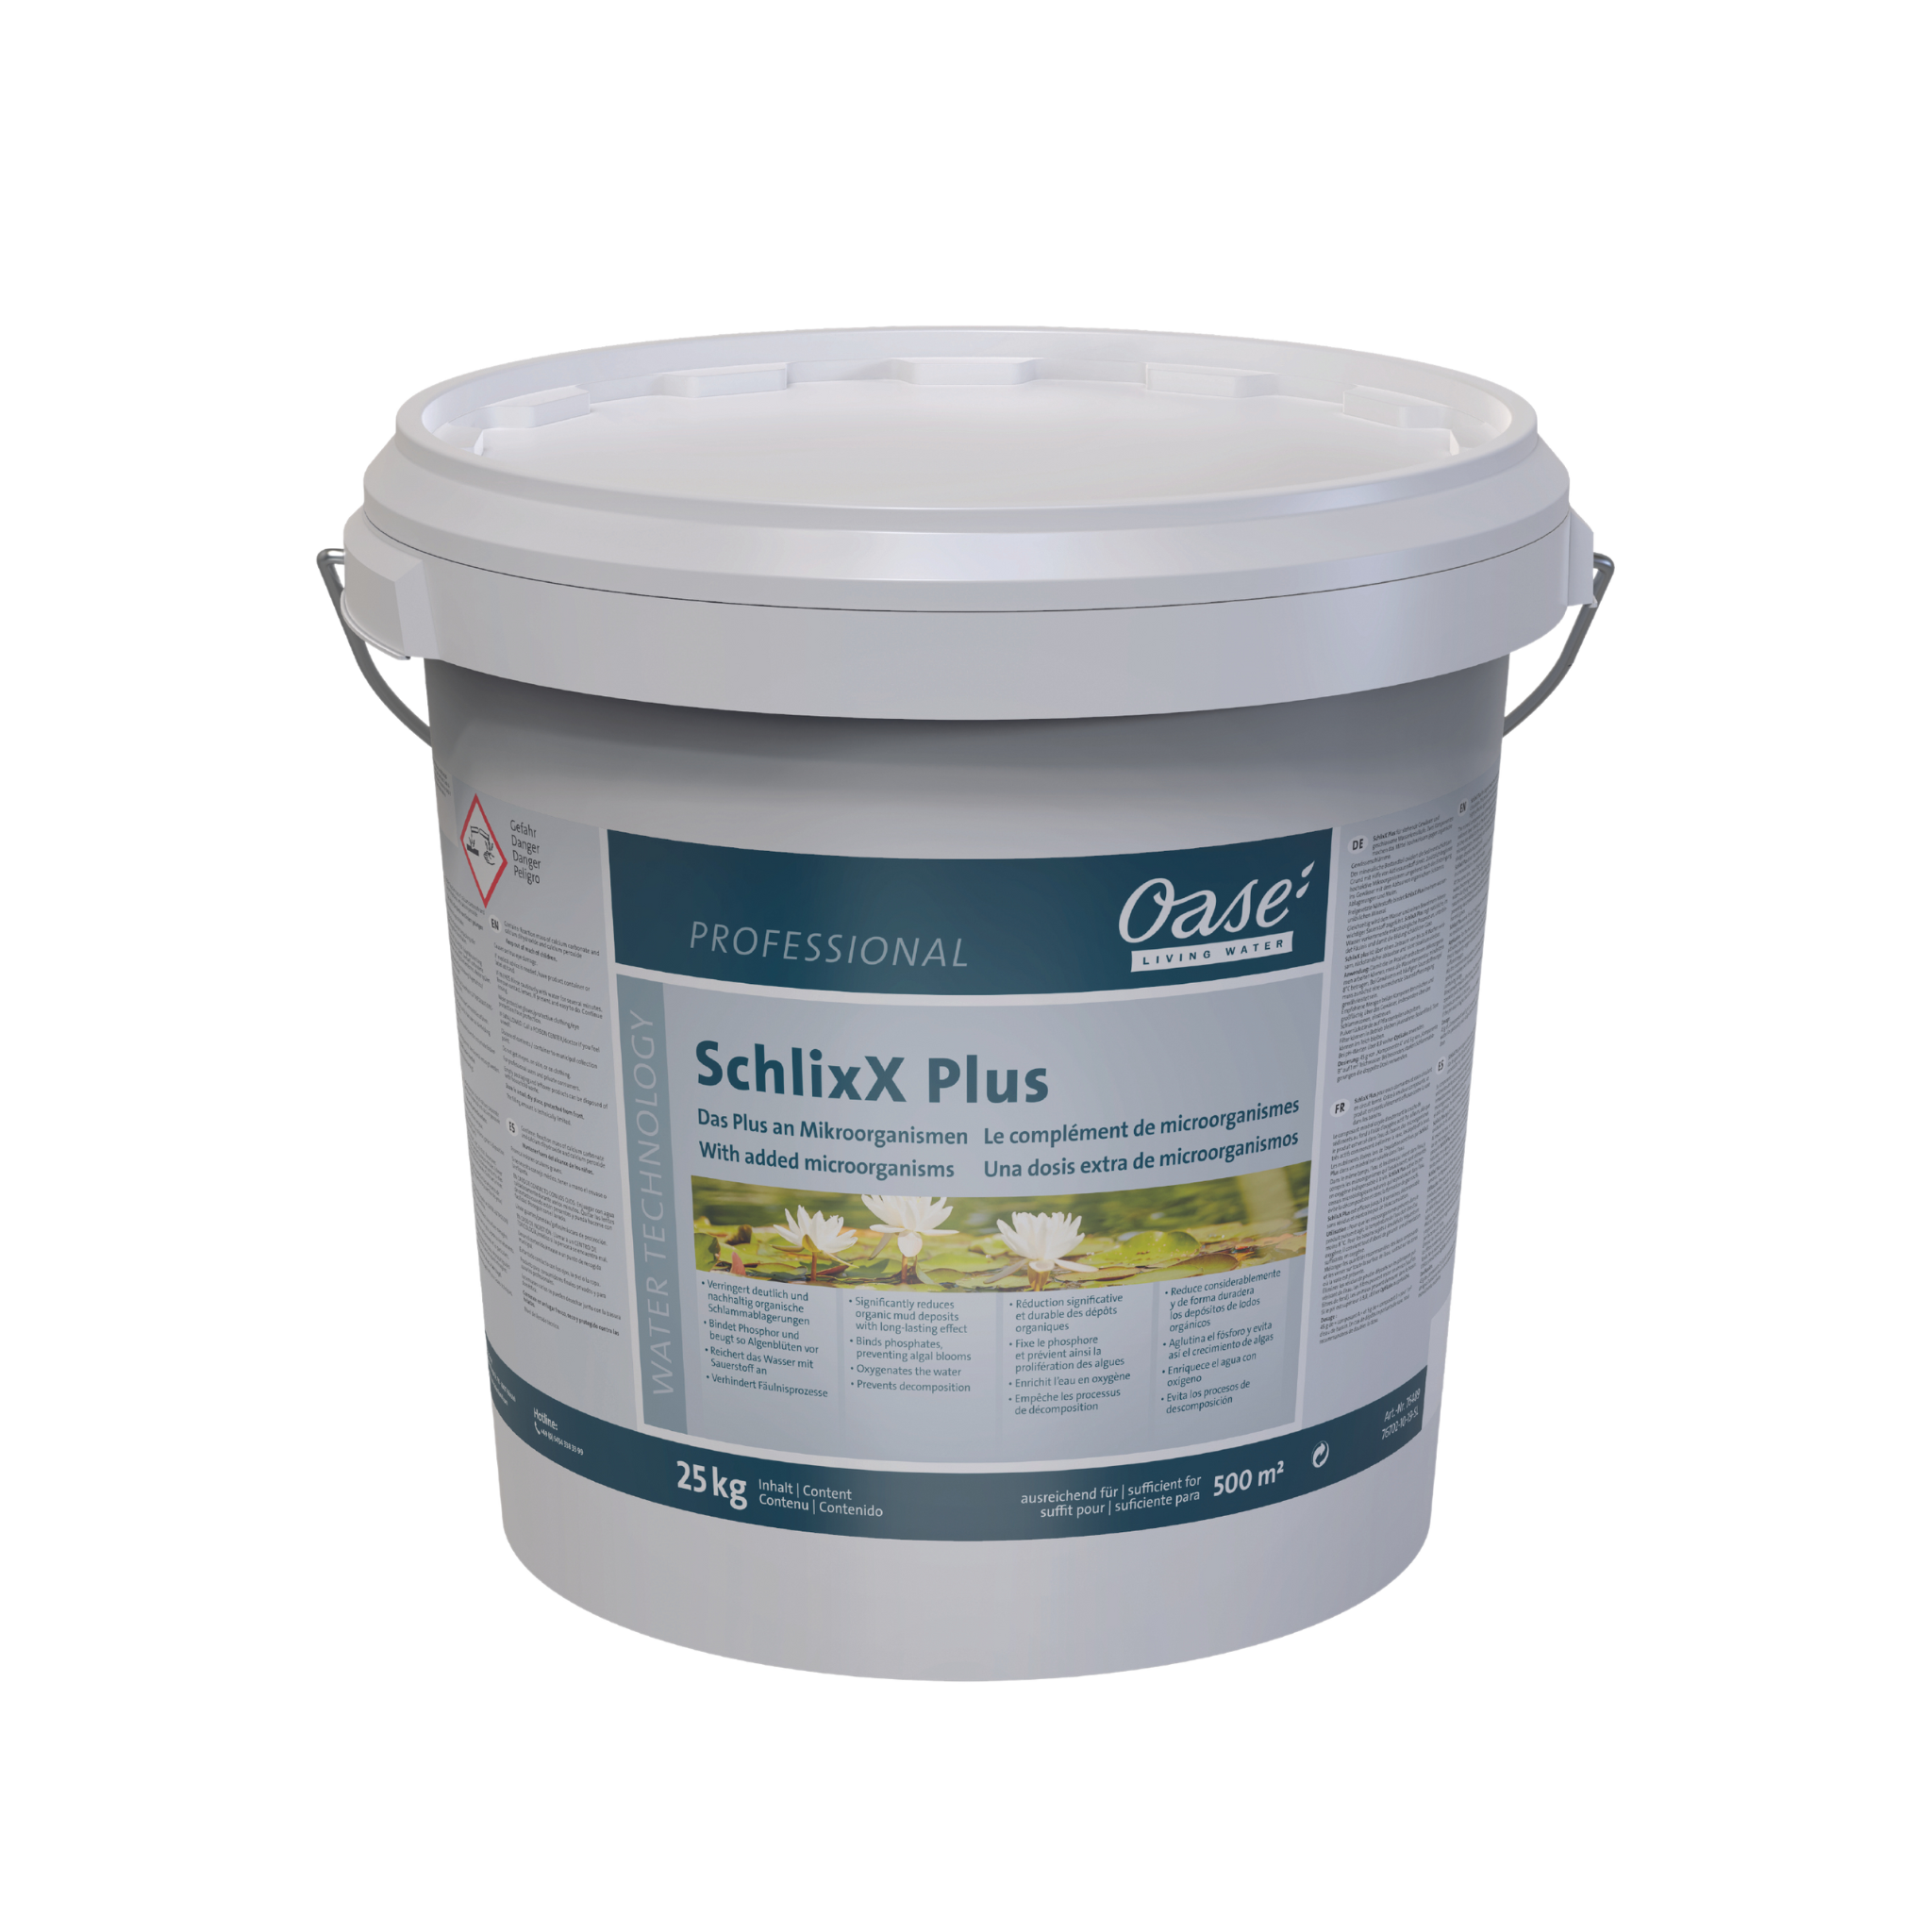 SchlixX Plus by OASE.Reduces sludge with high effective micro-organismSludge reduction without excavation